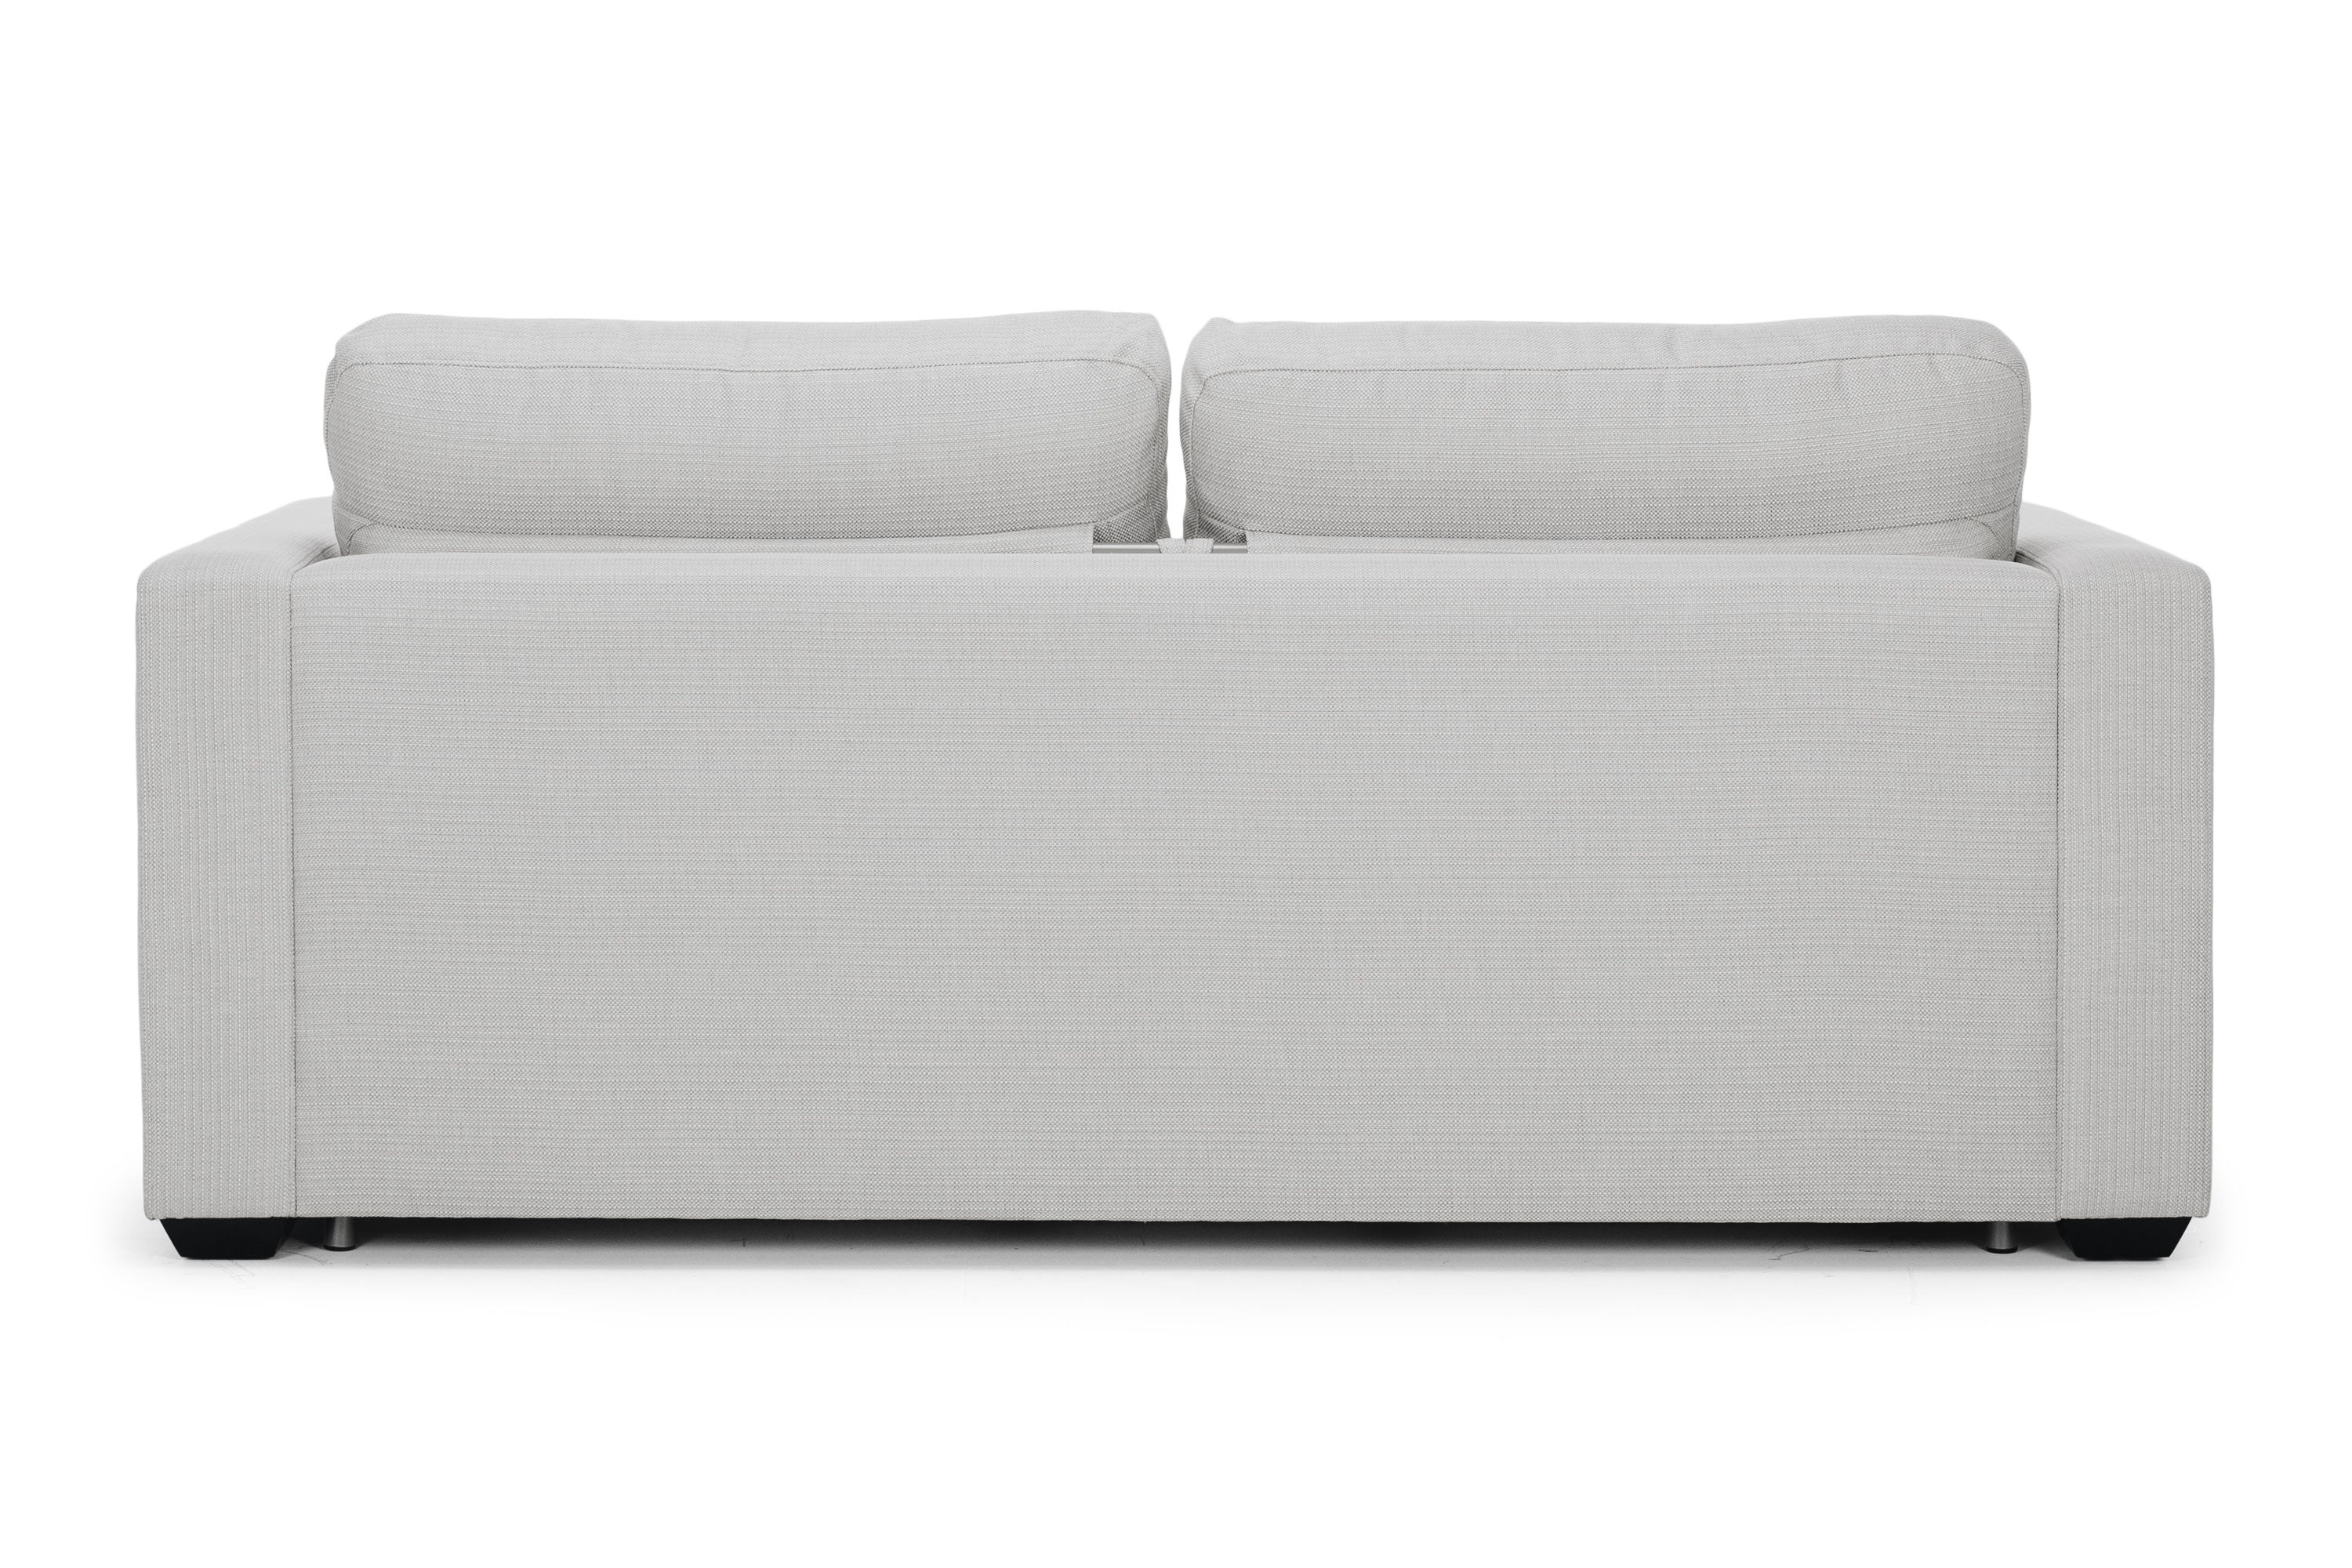 SUMMIT QUEEN SOFABED | 2 COLOURS